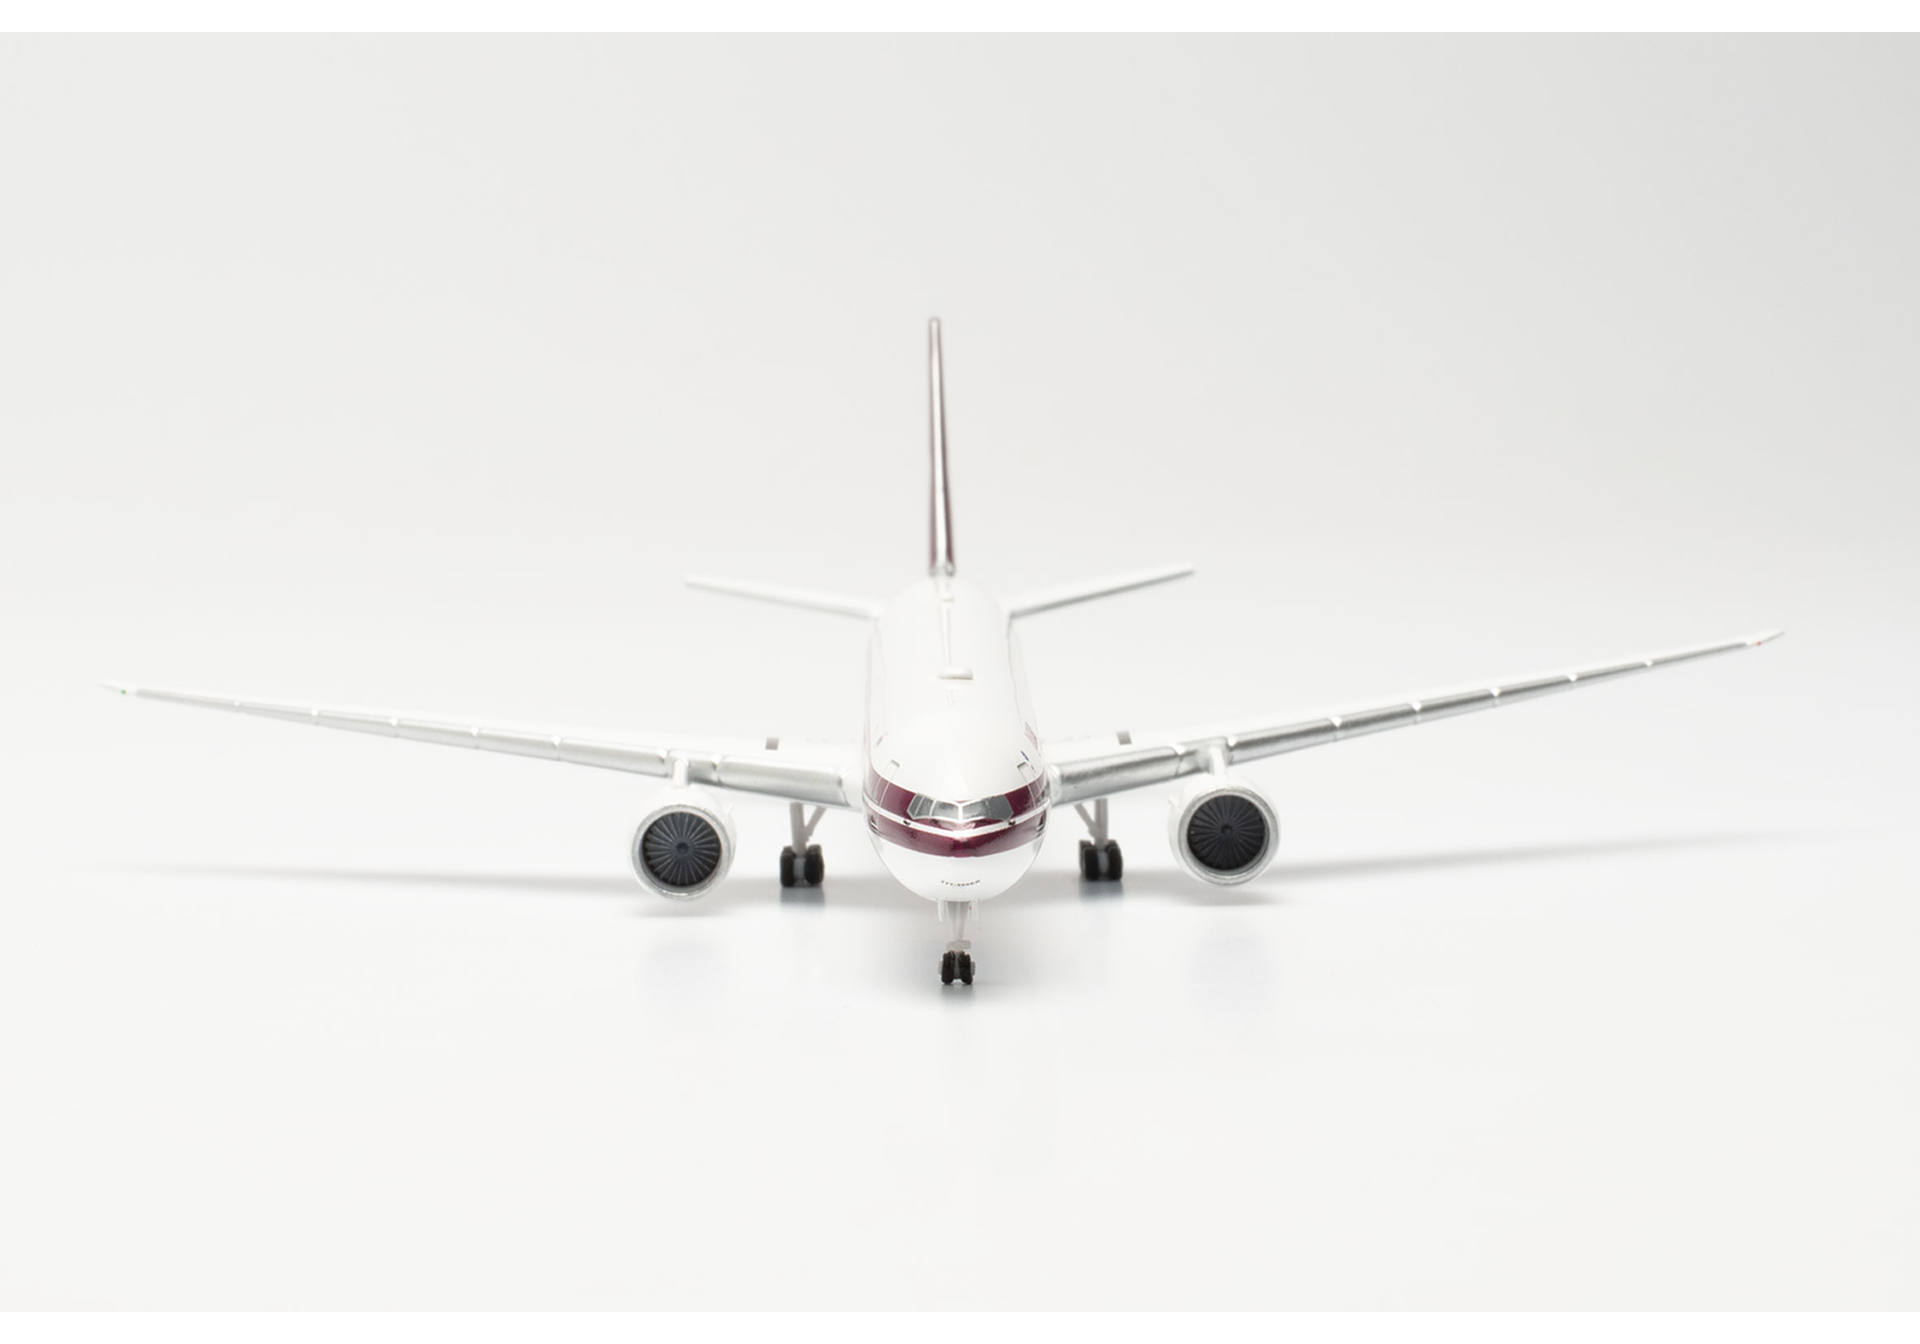 Qatar Airways Boeing 777-300ER - 25 Years of Excellence – A7-BAC